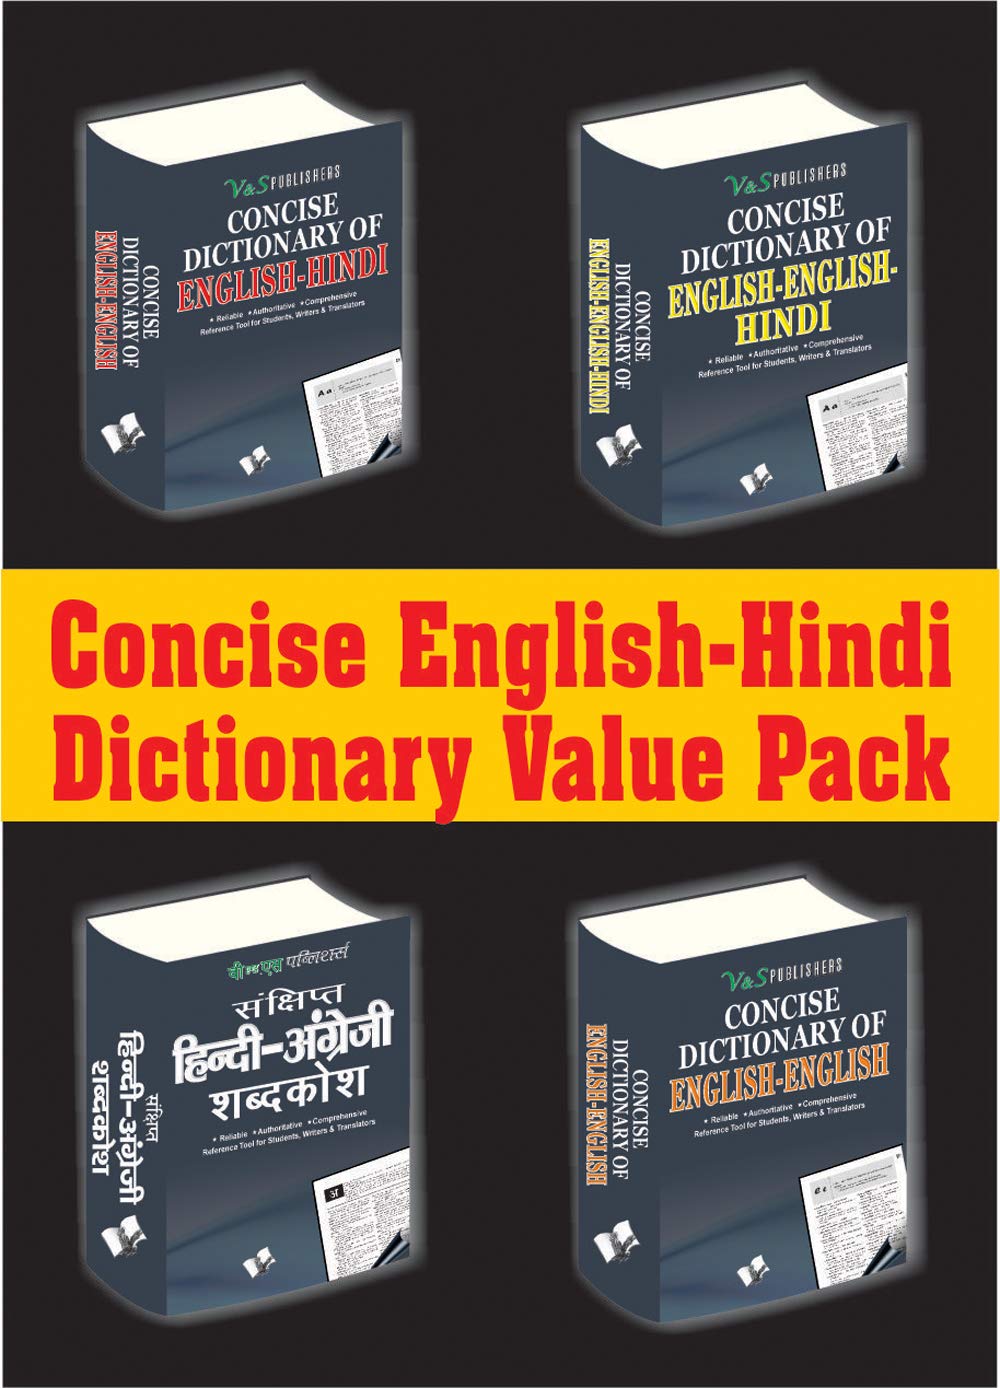 Concise English-Hindi Dictionary Value Pack: Accurate Meaning of English Words In Hindi for Improved Writing, Better Translation